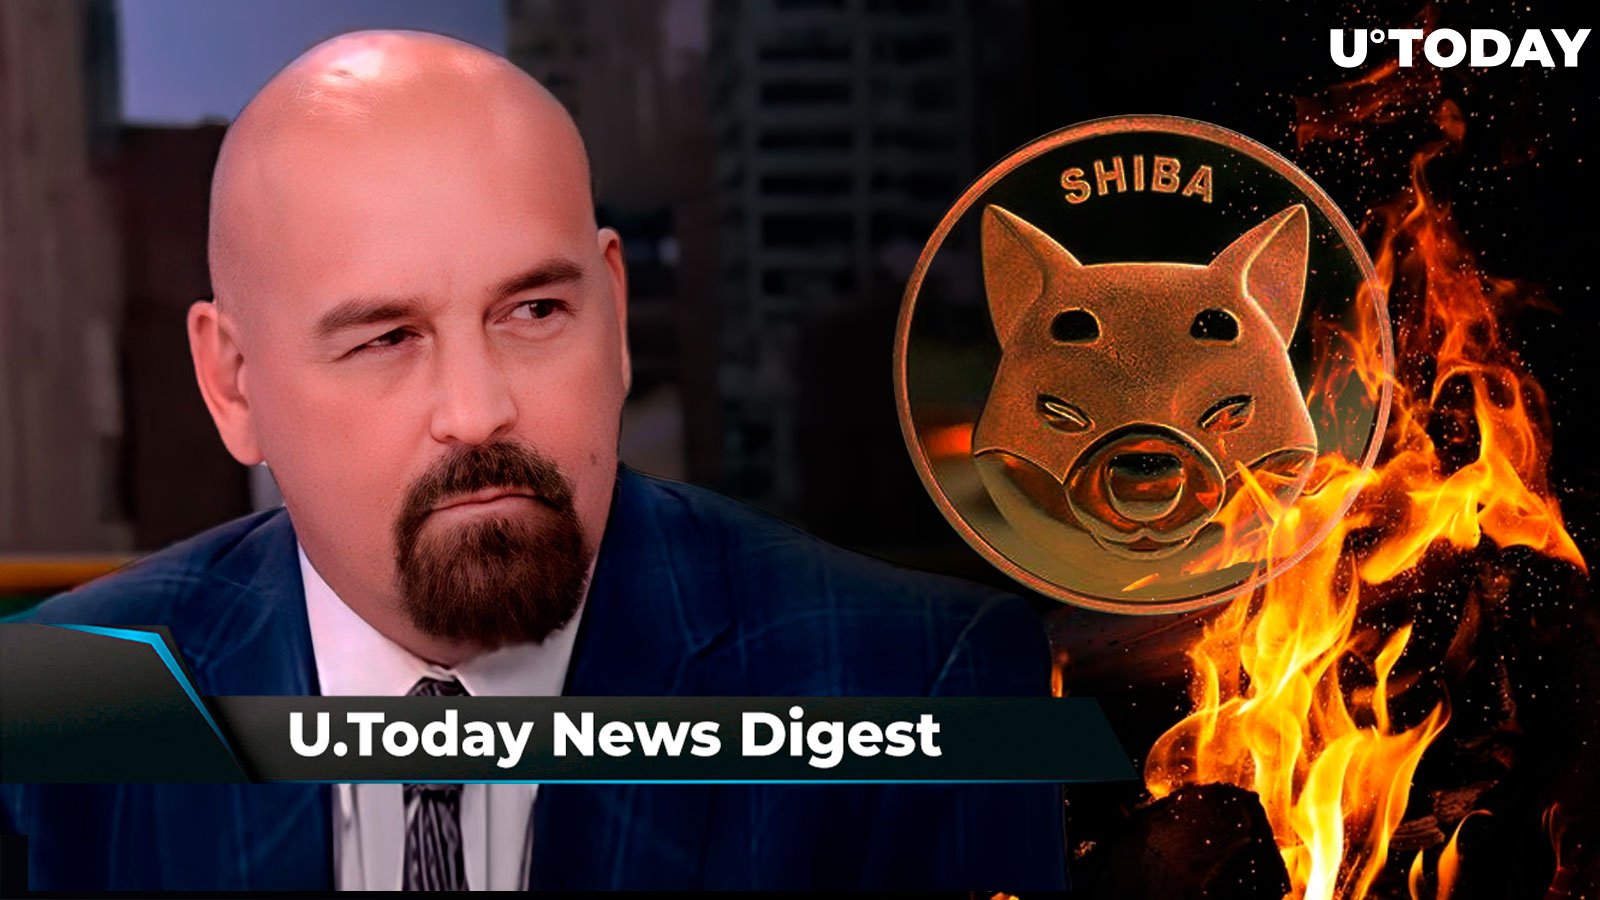 Binance Announces XRP Rewards, 111 Trillion SHIB Could be Burned in Months, John Deaton Predicts Shocking Thing about Ripple Lawsuit: Crypto News Digest by U.Today